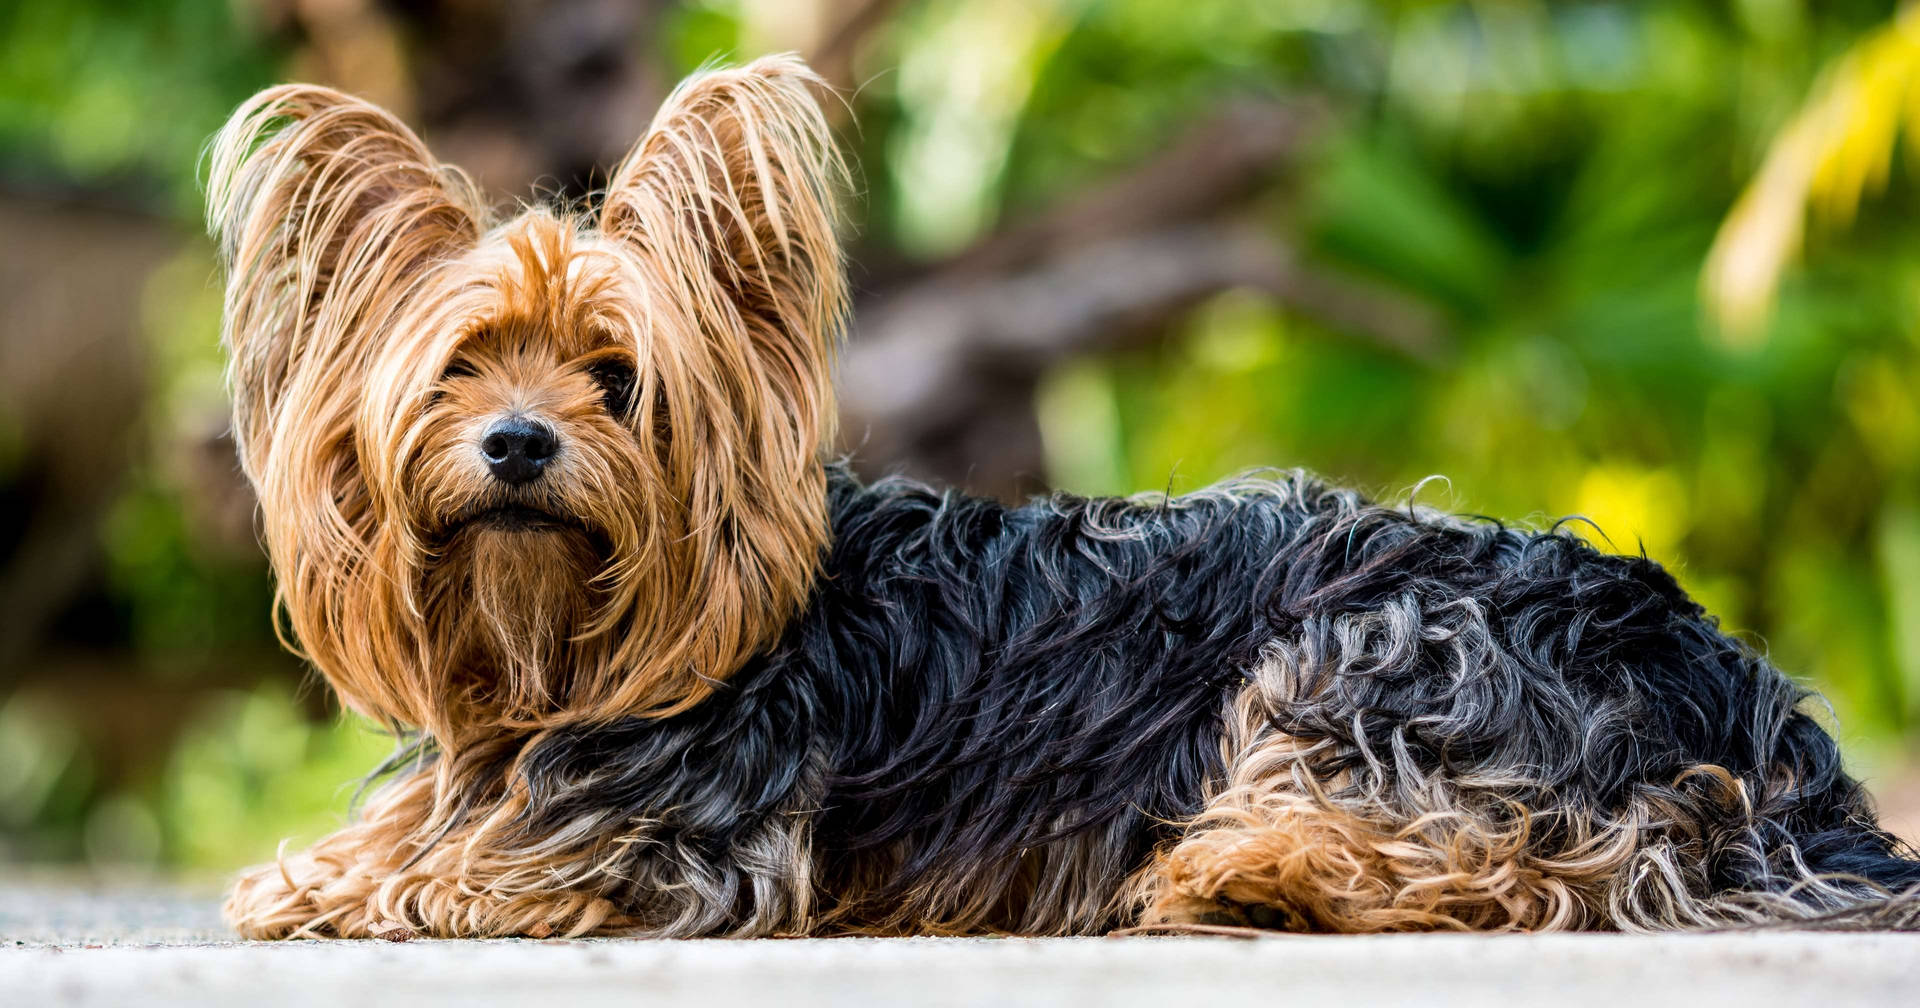 Yorkshire Terrier Nature Photography Wallpaper